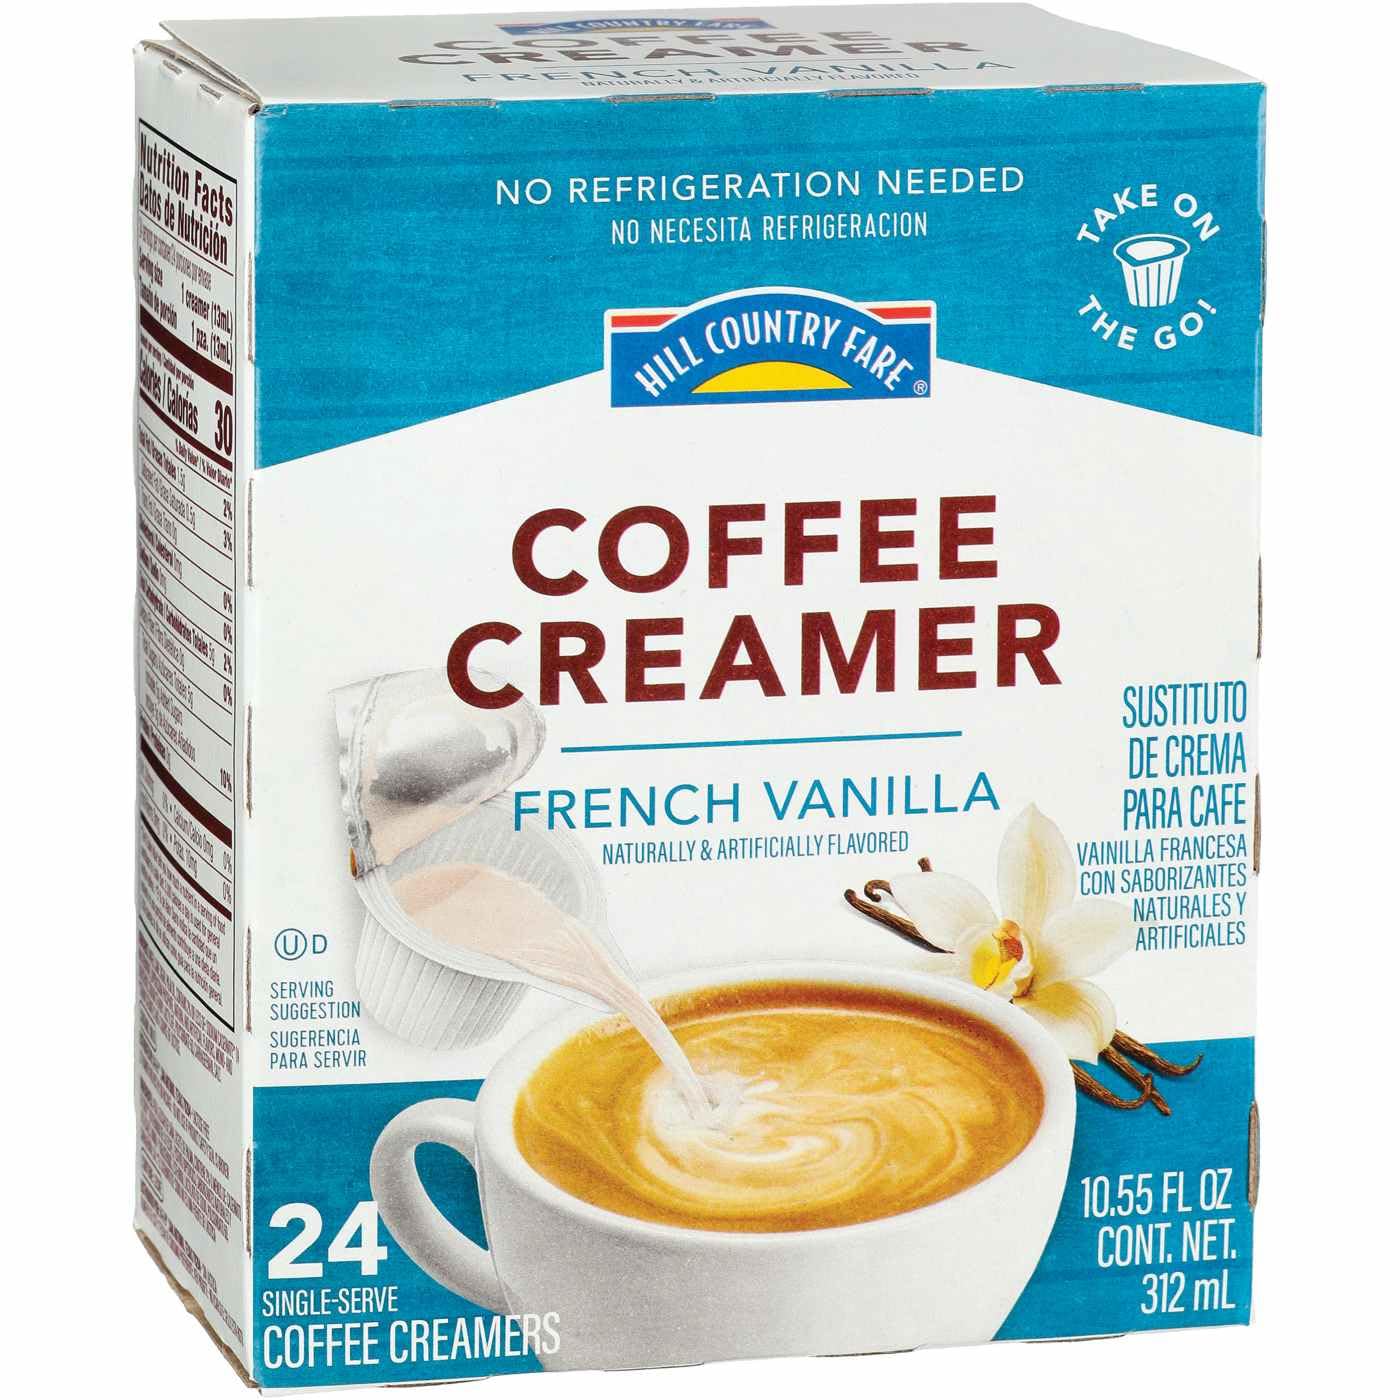 HEB Hill Country Fare Coffee Creamer Single Serve Cups, 24 Count - Easy Peel-Back Lid, No Refrigeration Needed, Rich Creaminess (French Vanilla)